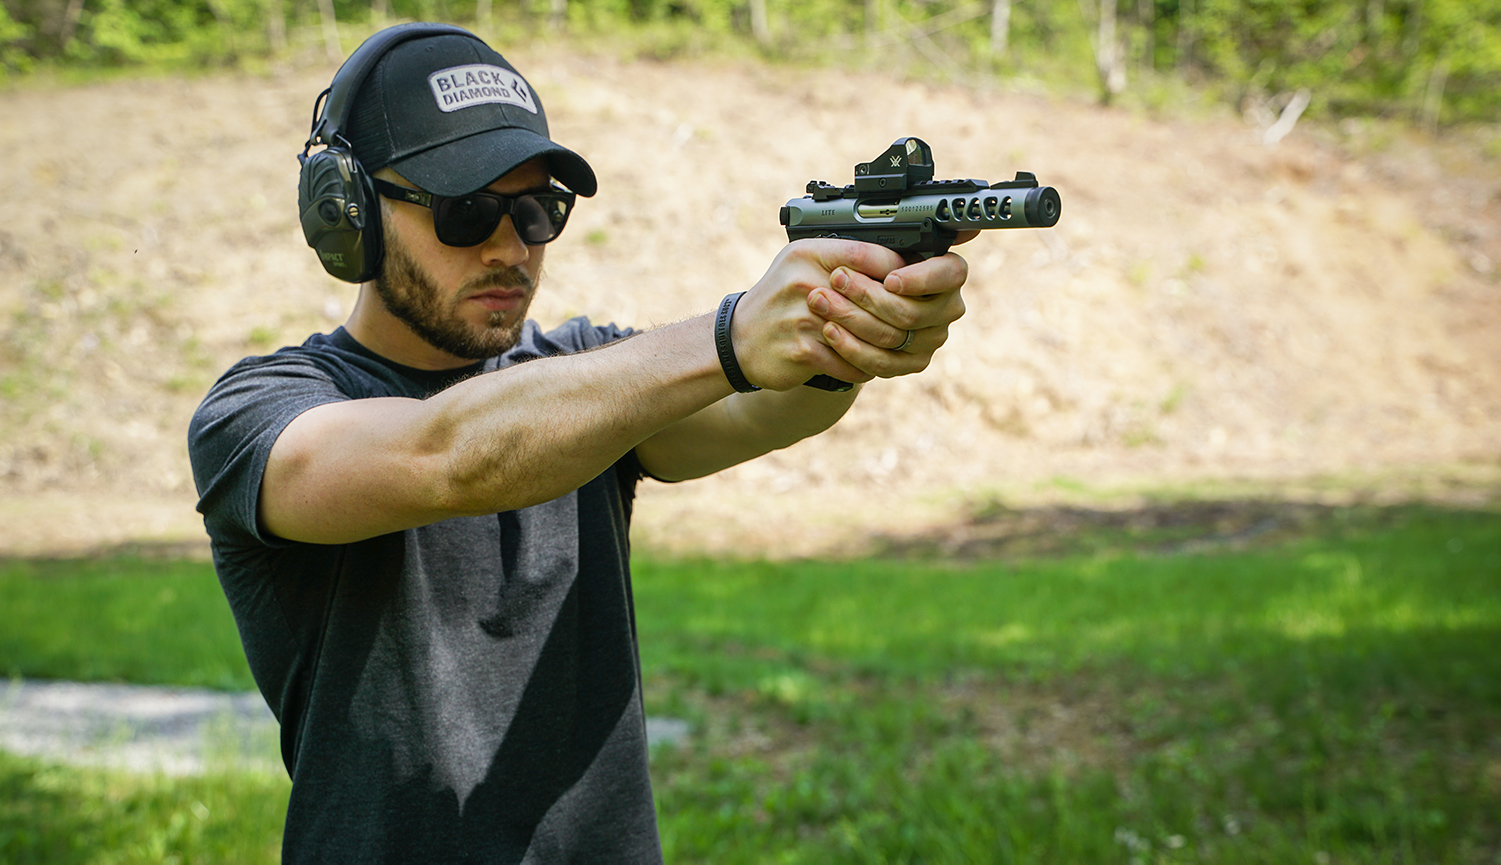 the author shooting 22LR ammo at the range